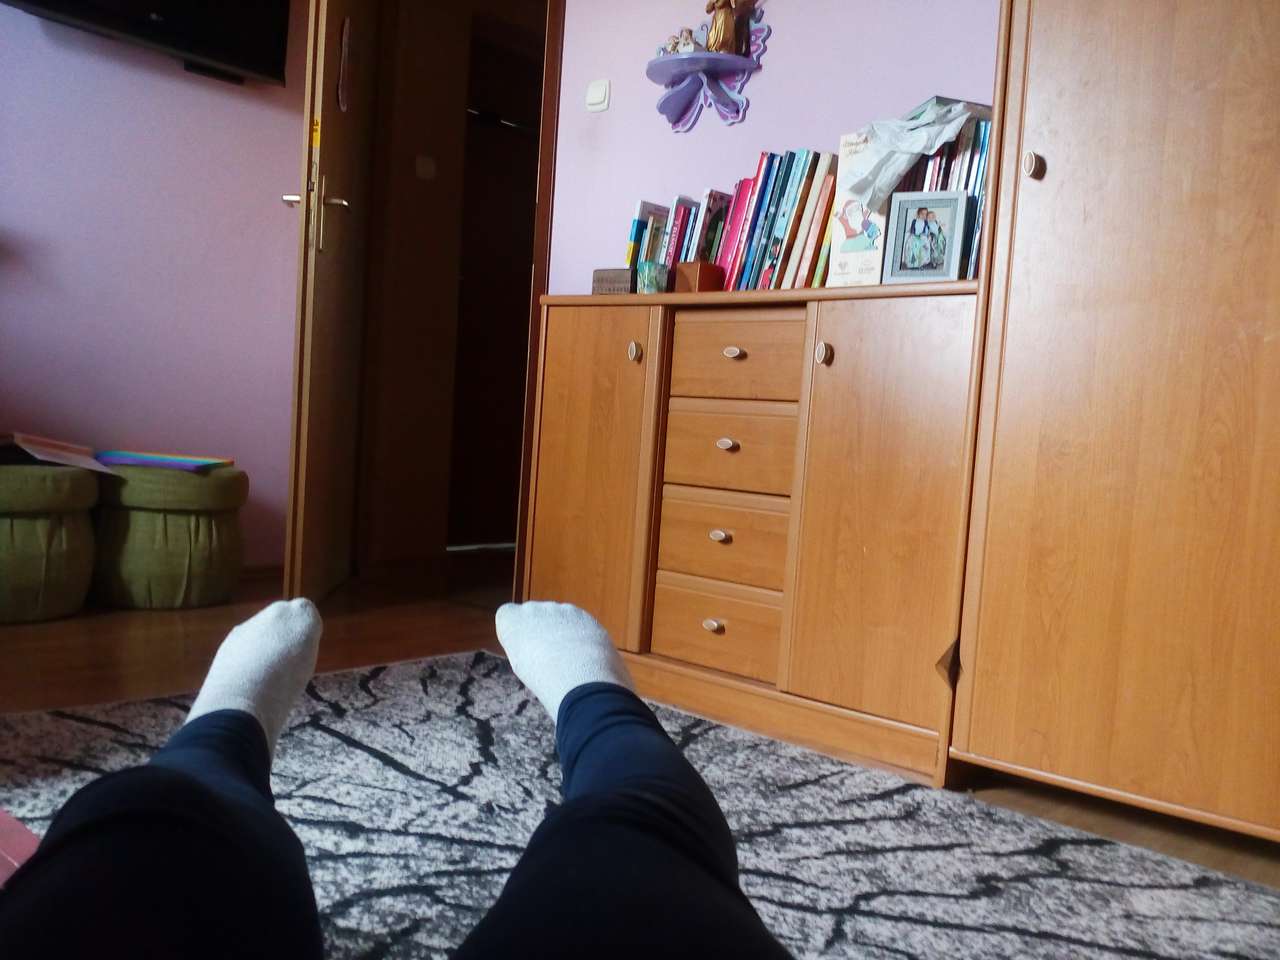 My sisters room and her legs online puzzle